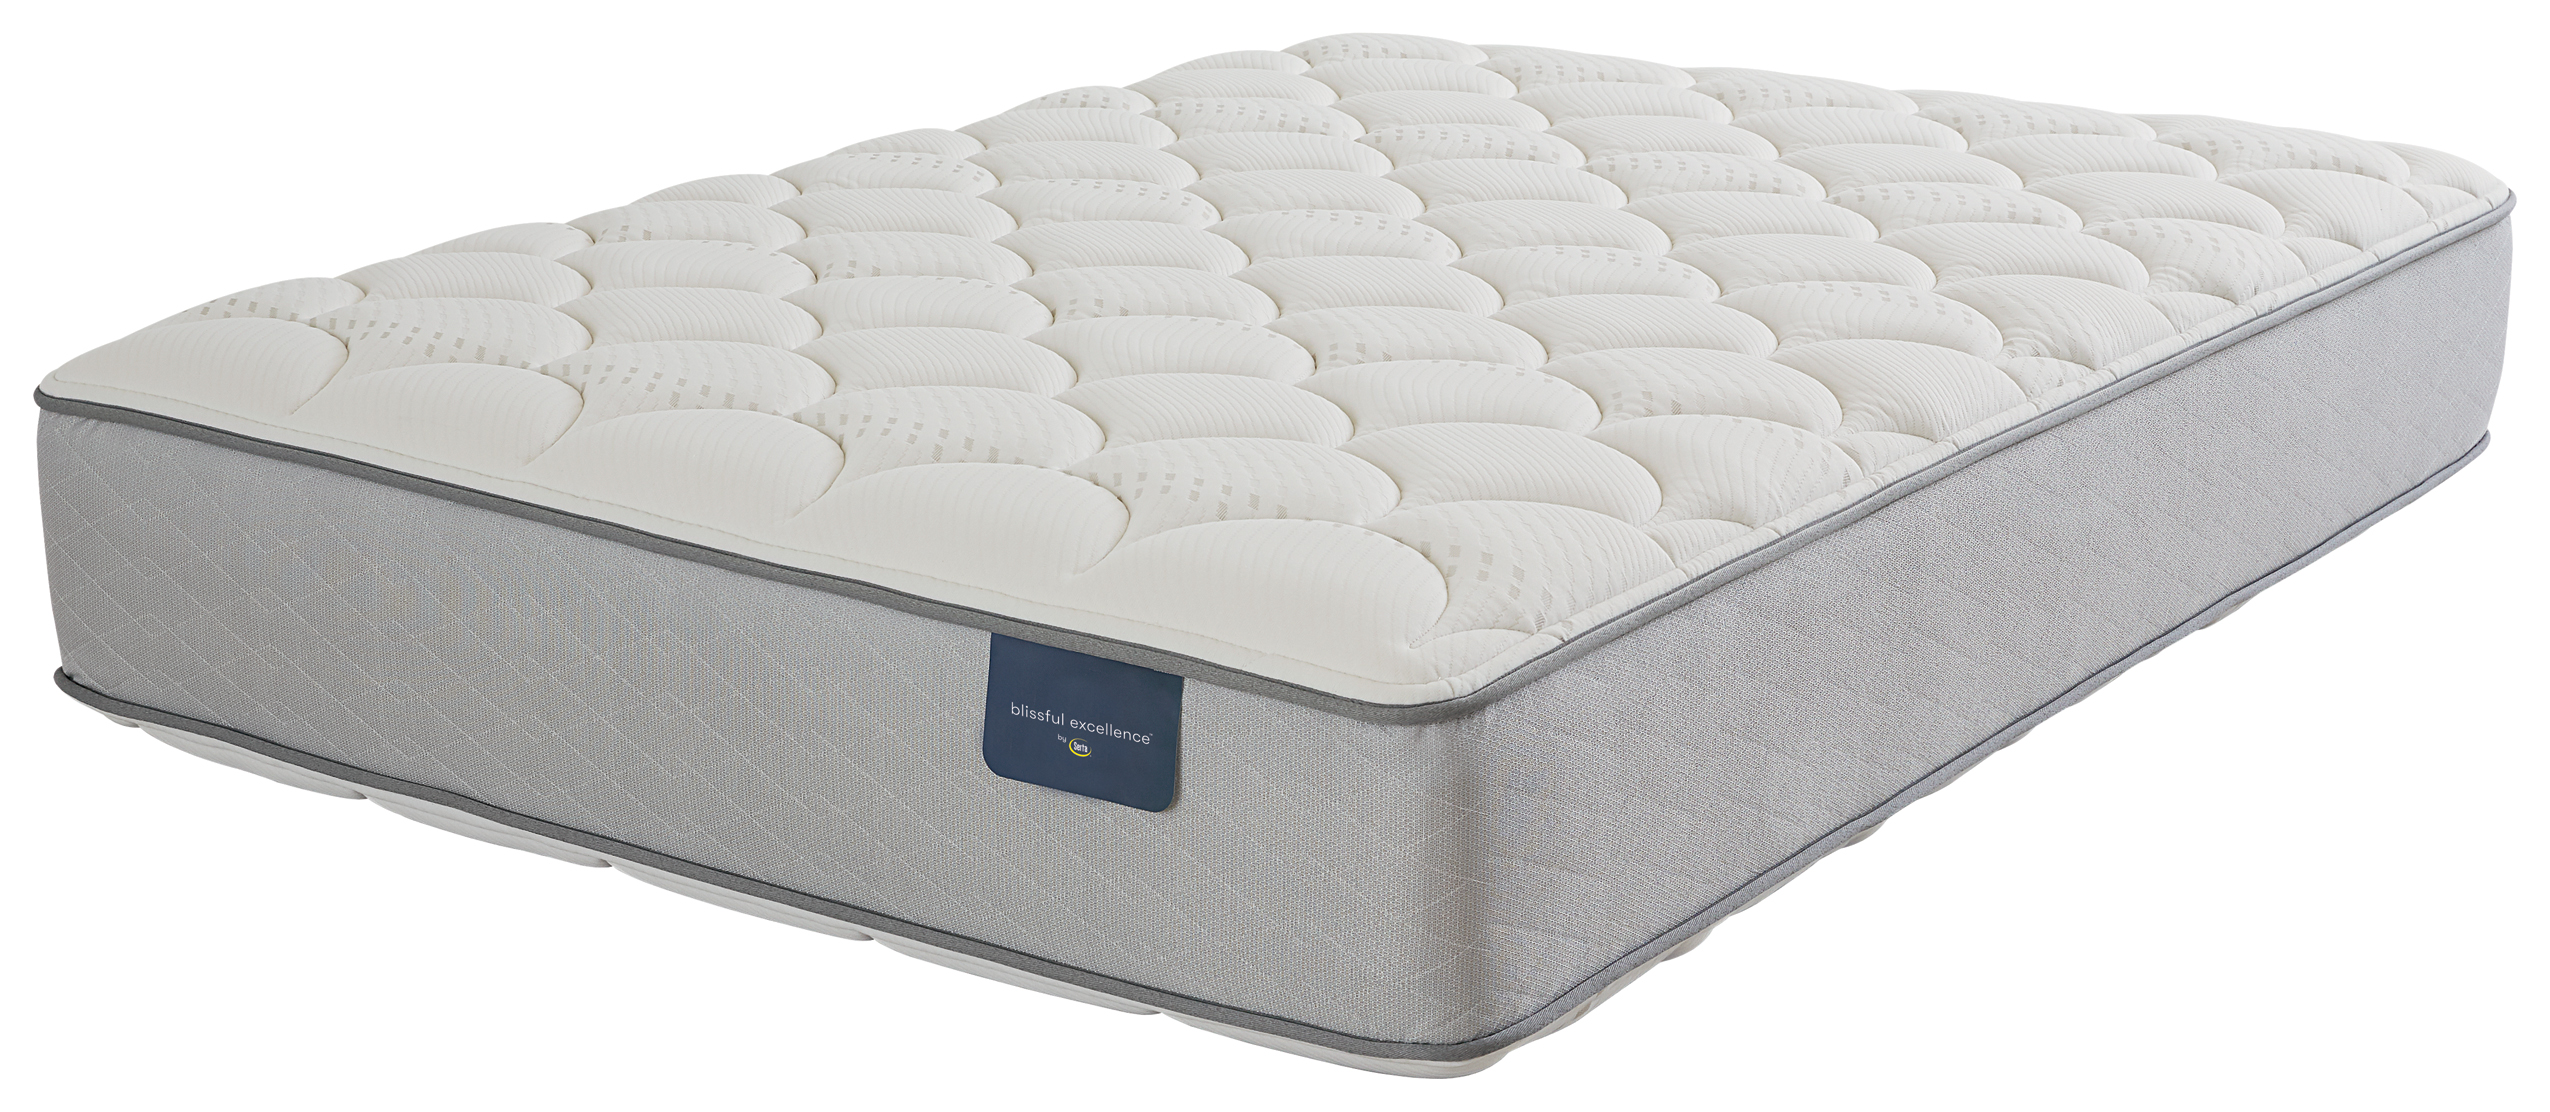 serta perfect sleeper hotel suite double sided mattress